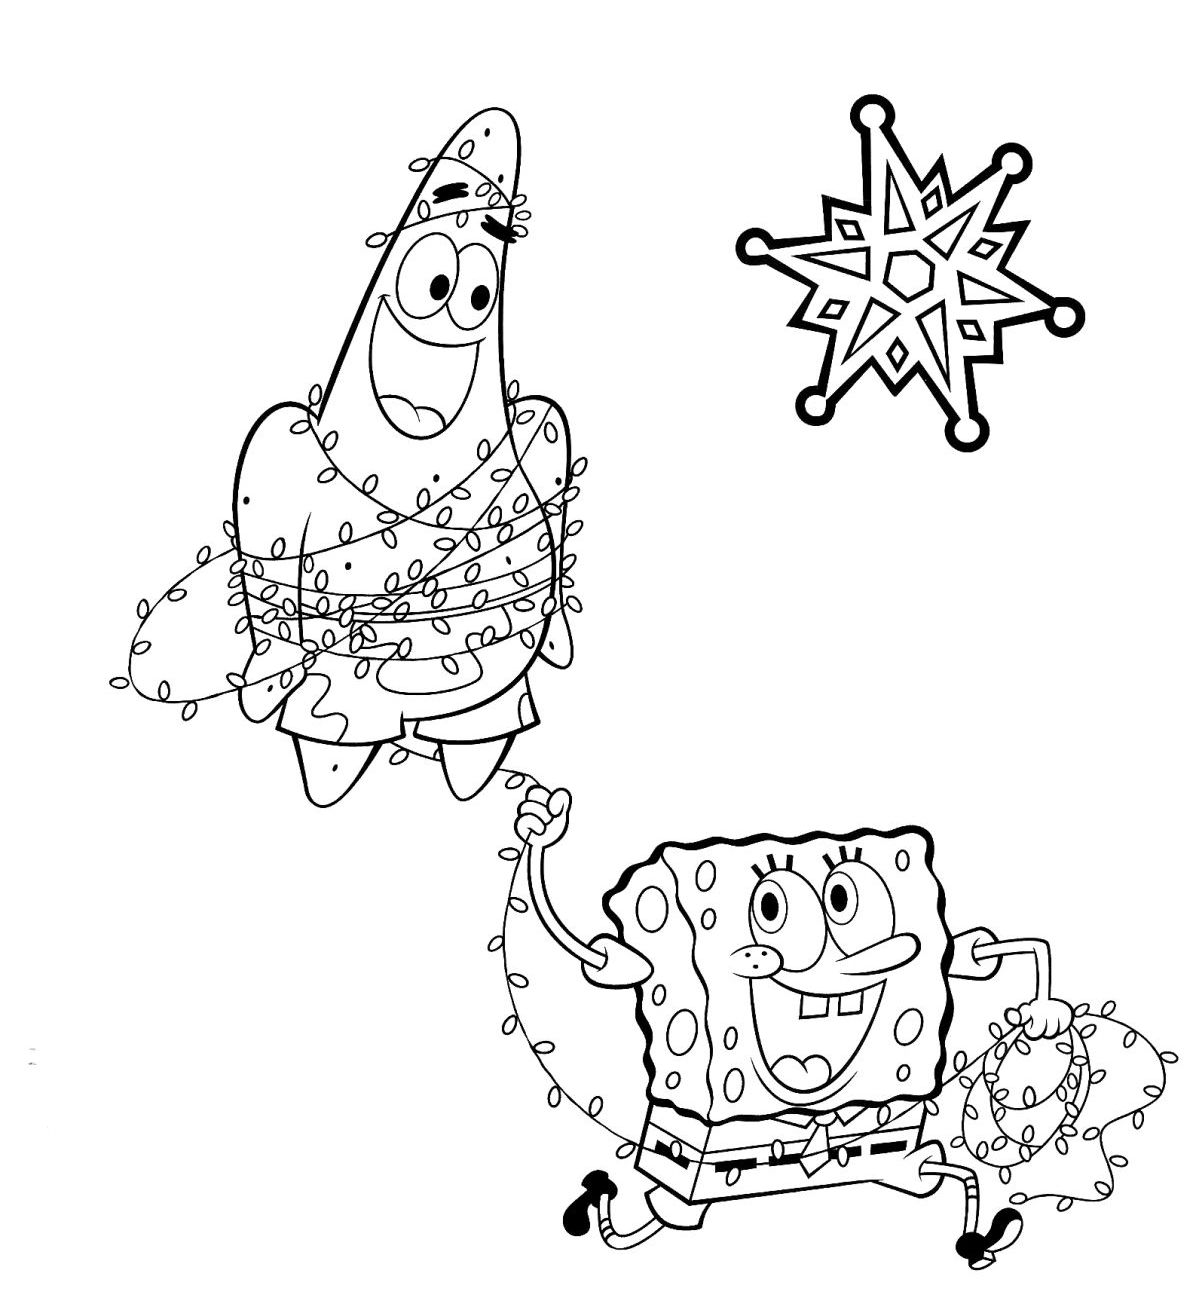 Spongebob S Of Christmas Coloring Page